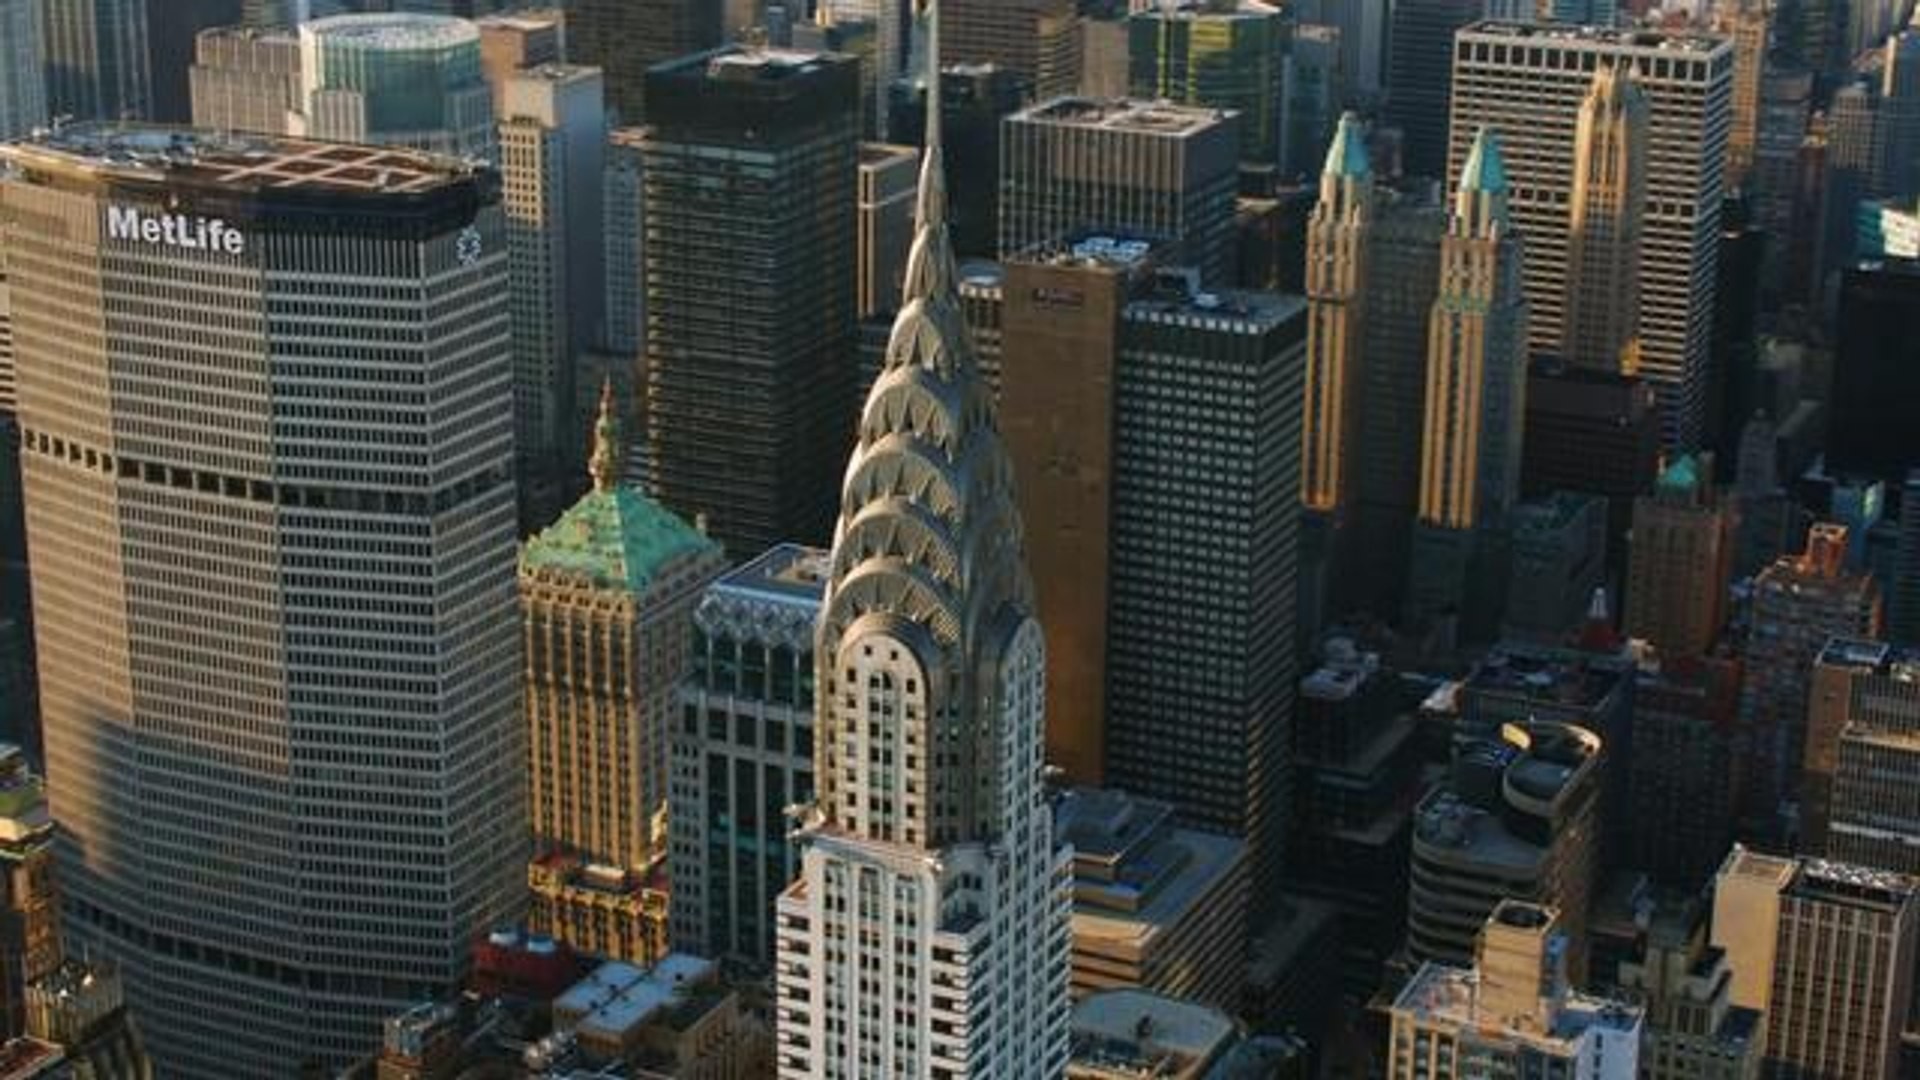 1920x1080 New York City's iconic Chrysler Building is up for sale